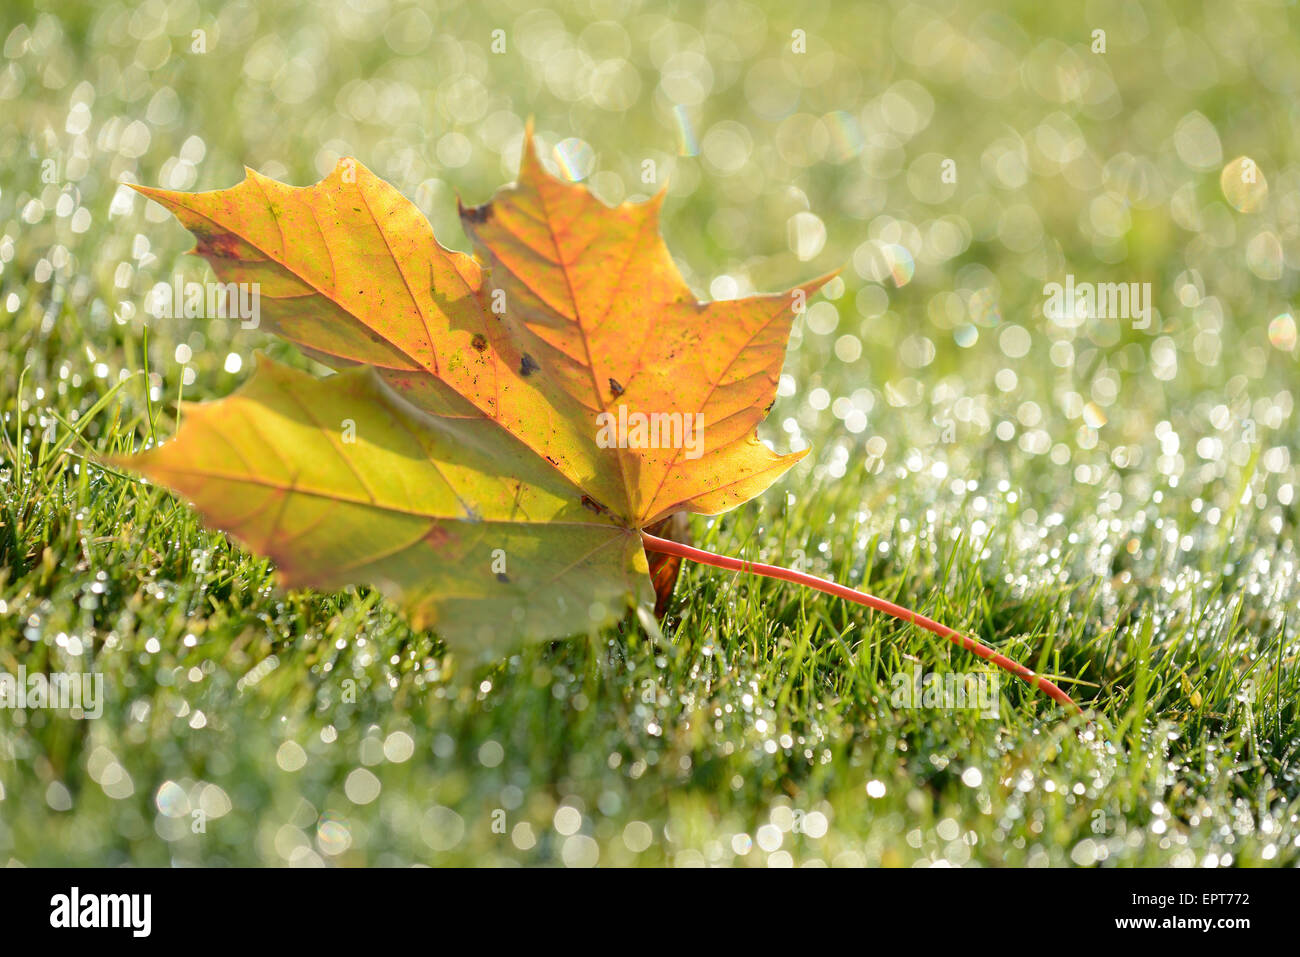 Close-up of Norway Maple (Acer platanoides) Leaf on Grass in Autumn, Bavaria, Germany Stock Photo